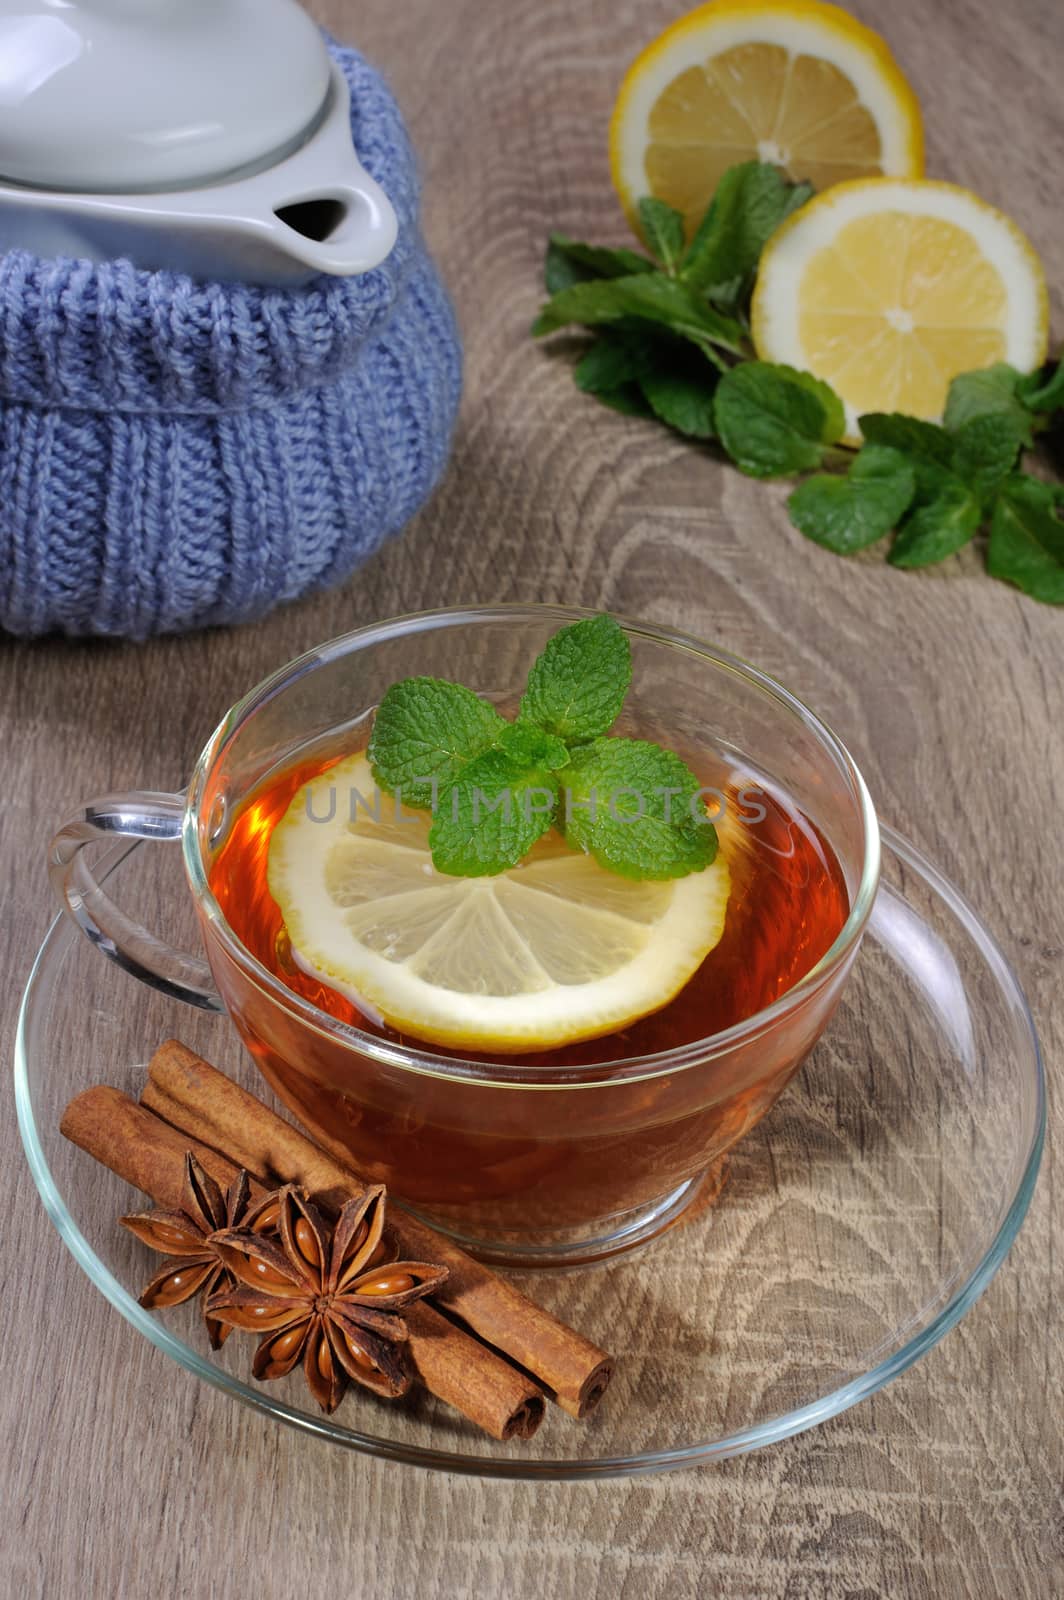 Cup of tea with a slice of lemon, mint and cinnamon